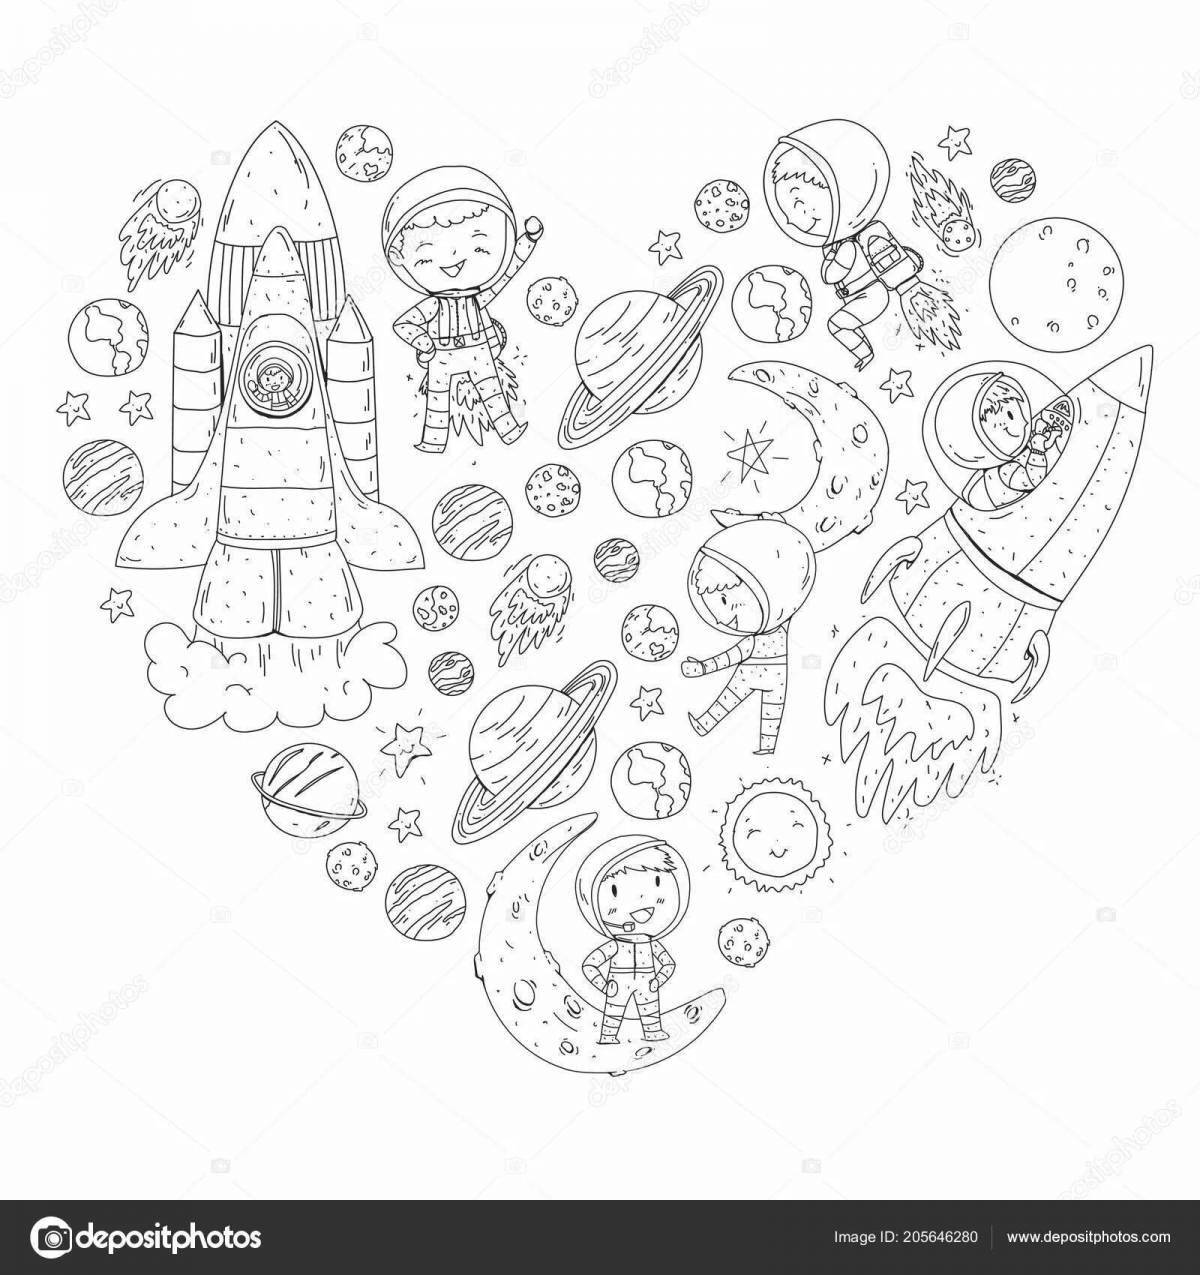 Fabulous space complex coloring book